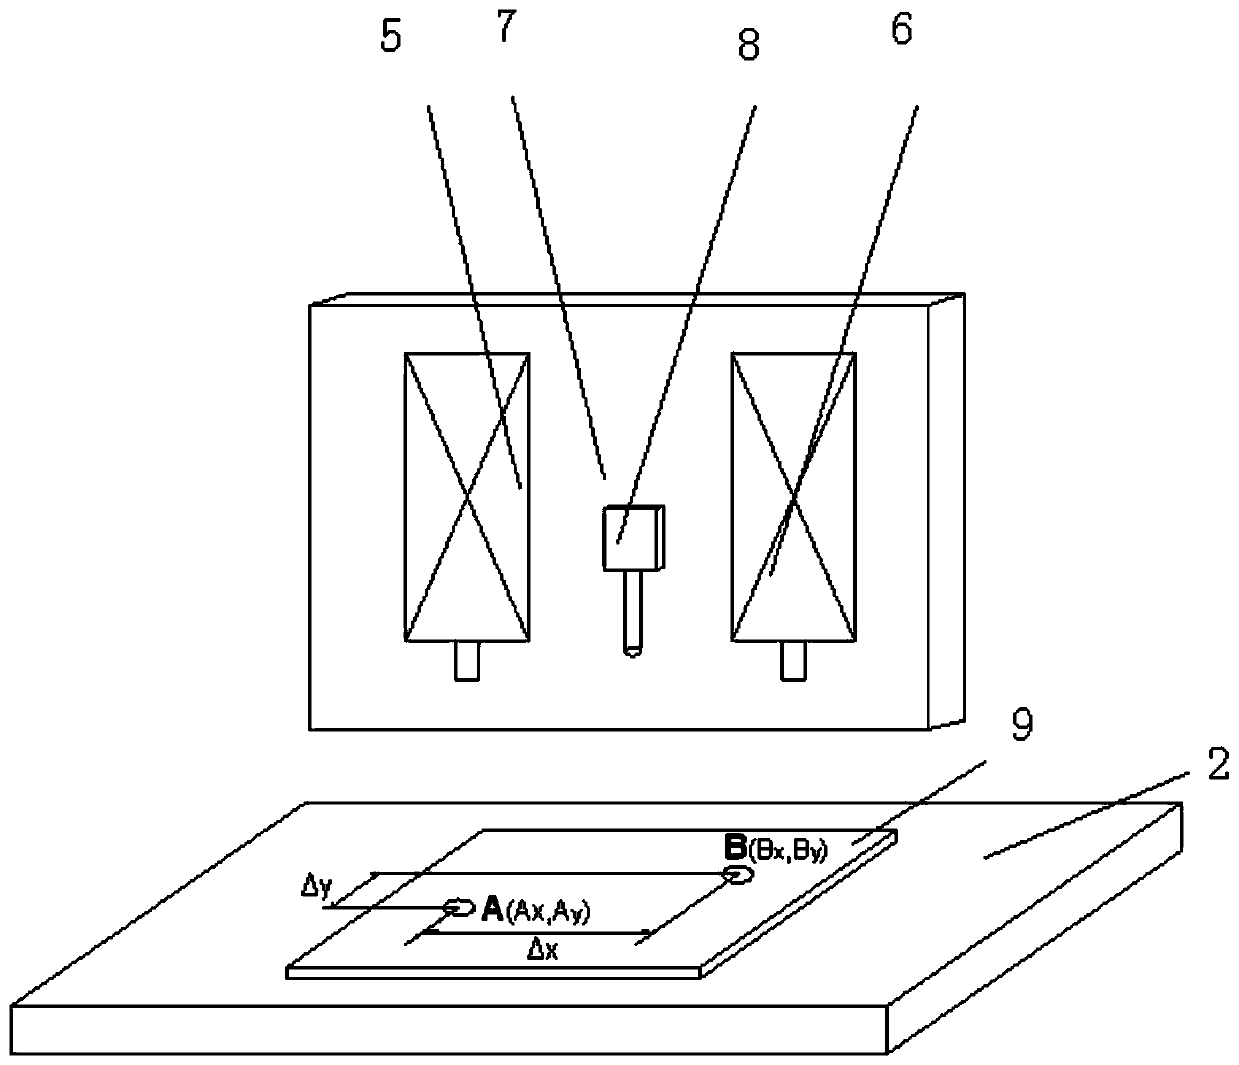 A method for calibrating the axis distance of a drilling and gong dual-purpose machine